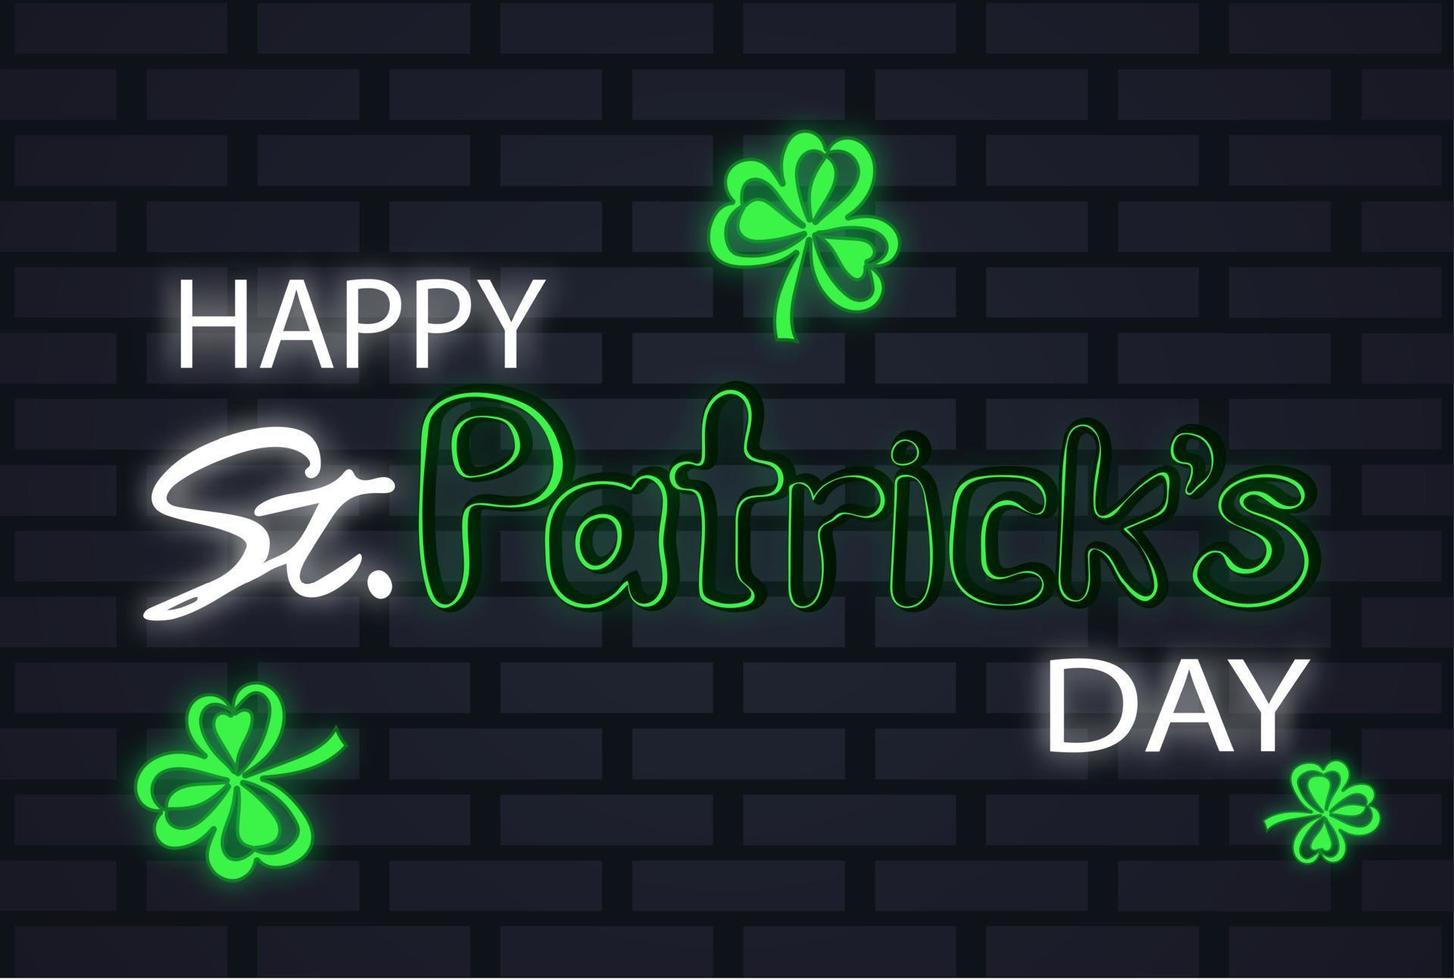 Neon Happy St. Patrick's day text on a brick wall background vector